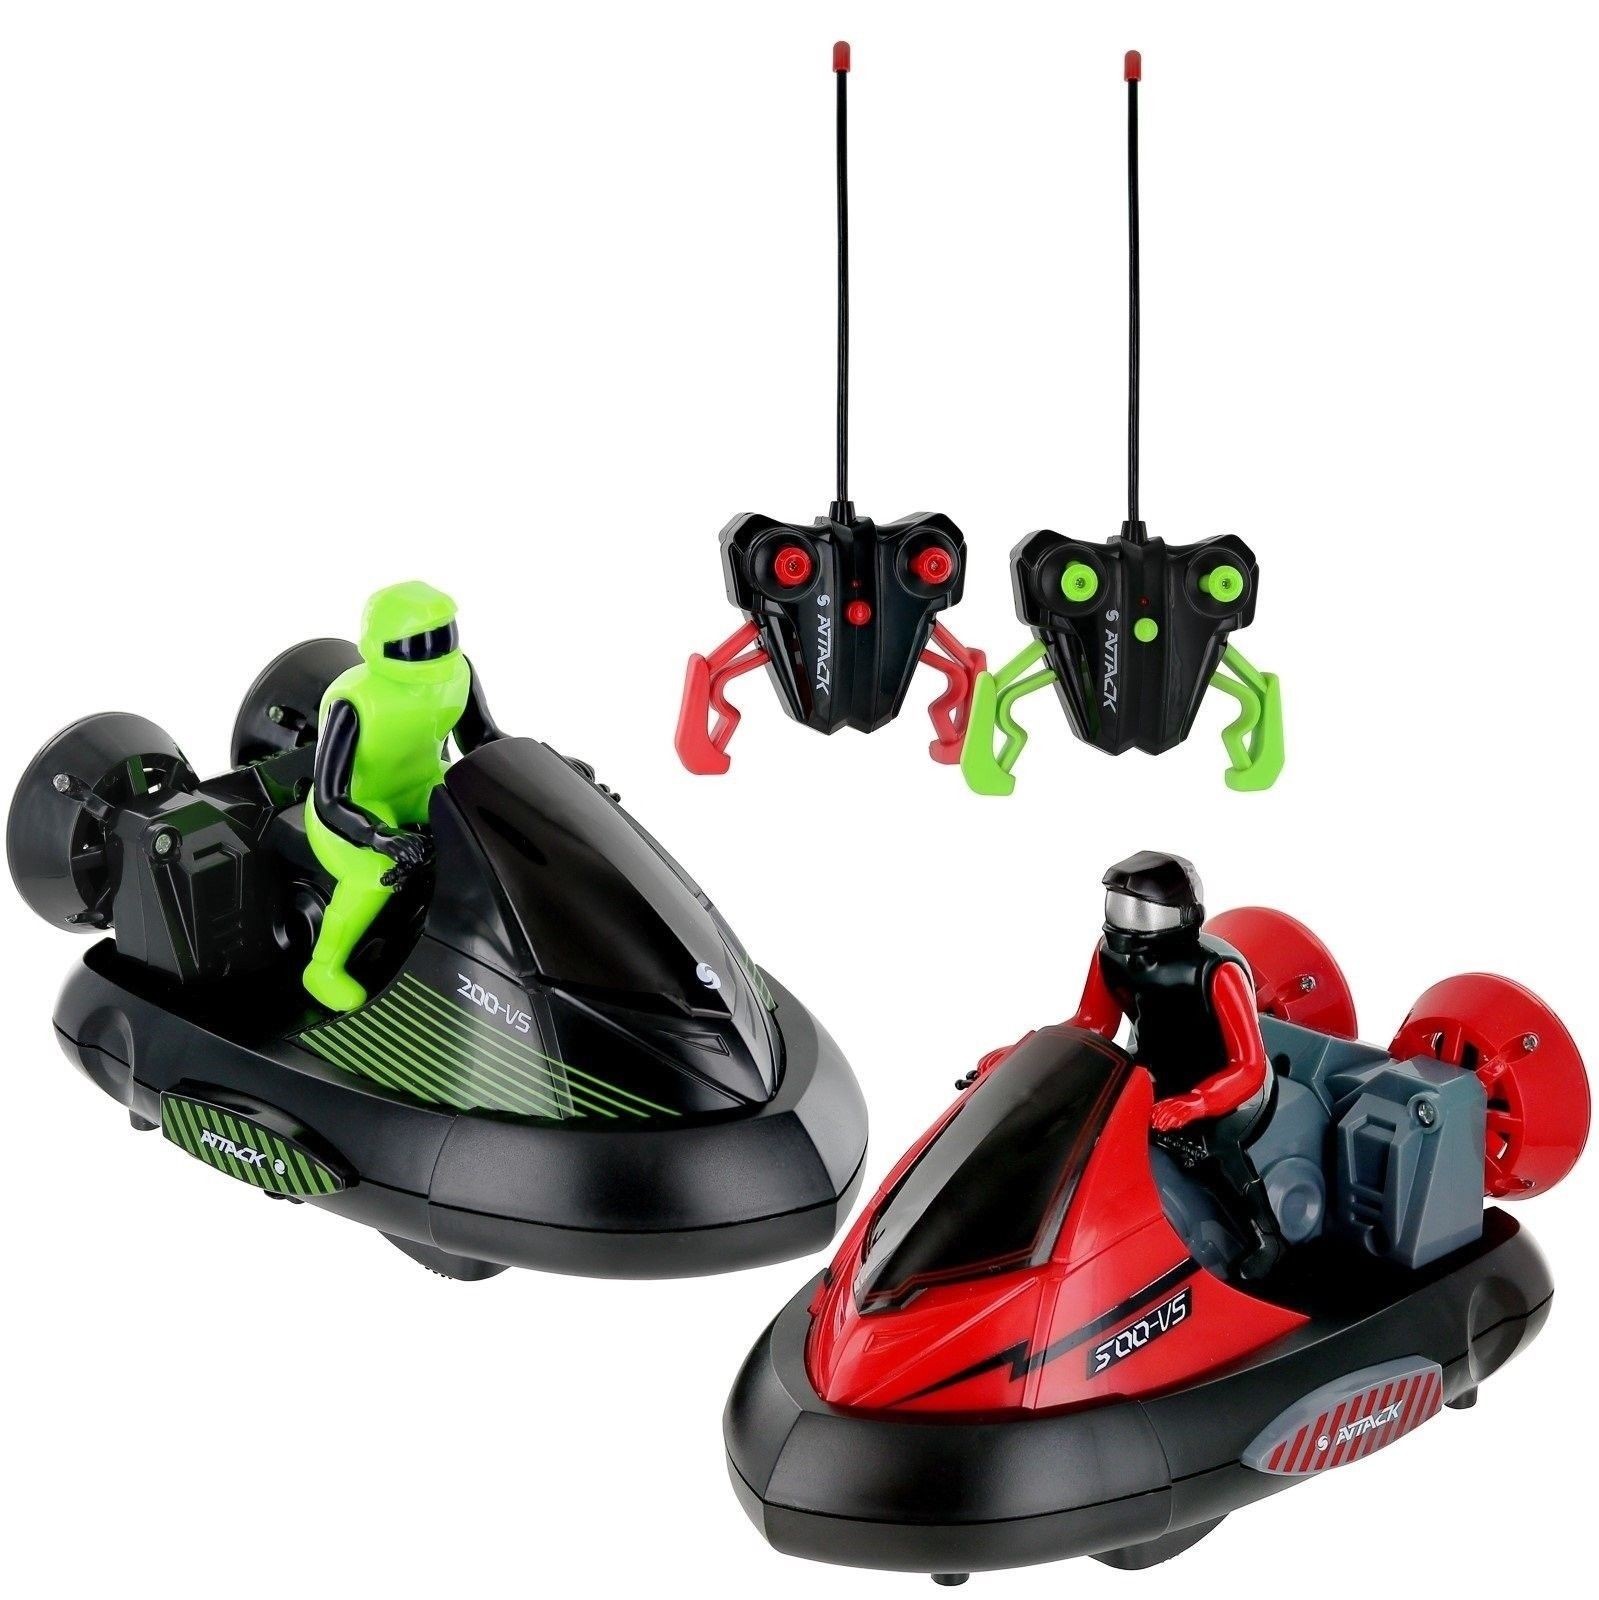 Set of 2 Stunt Remote Control RC Battle Bumper Cars With Drivers